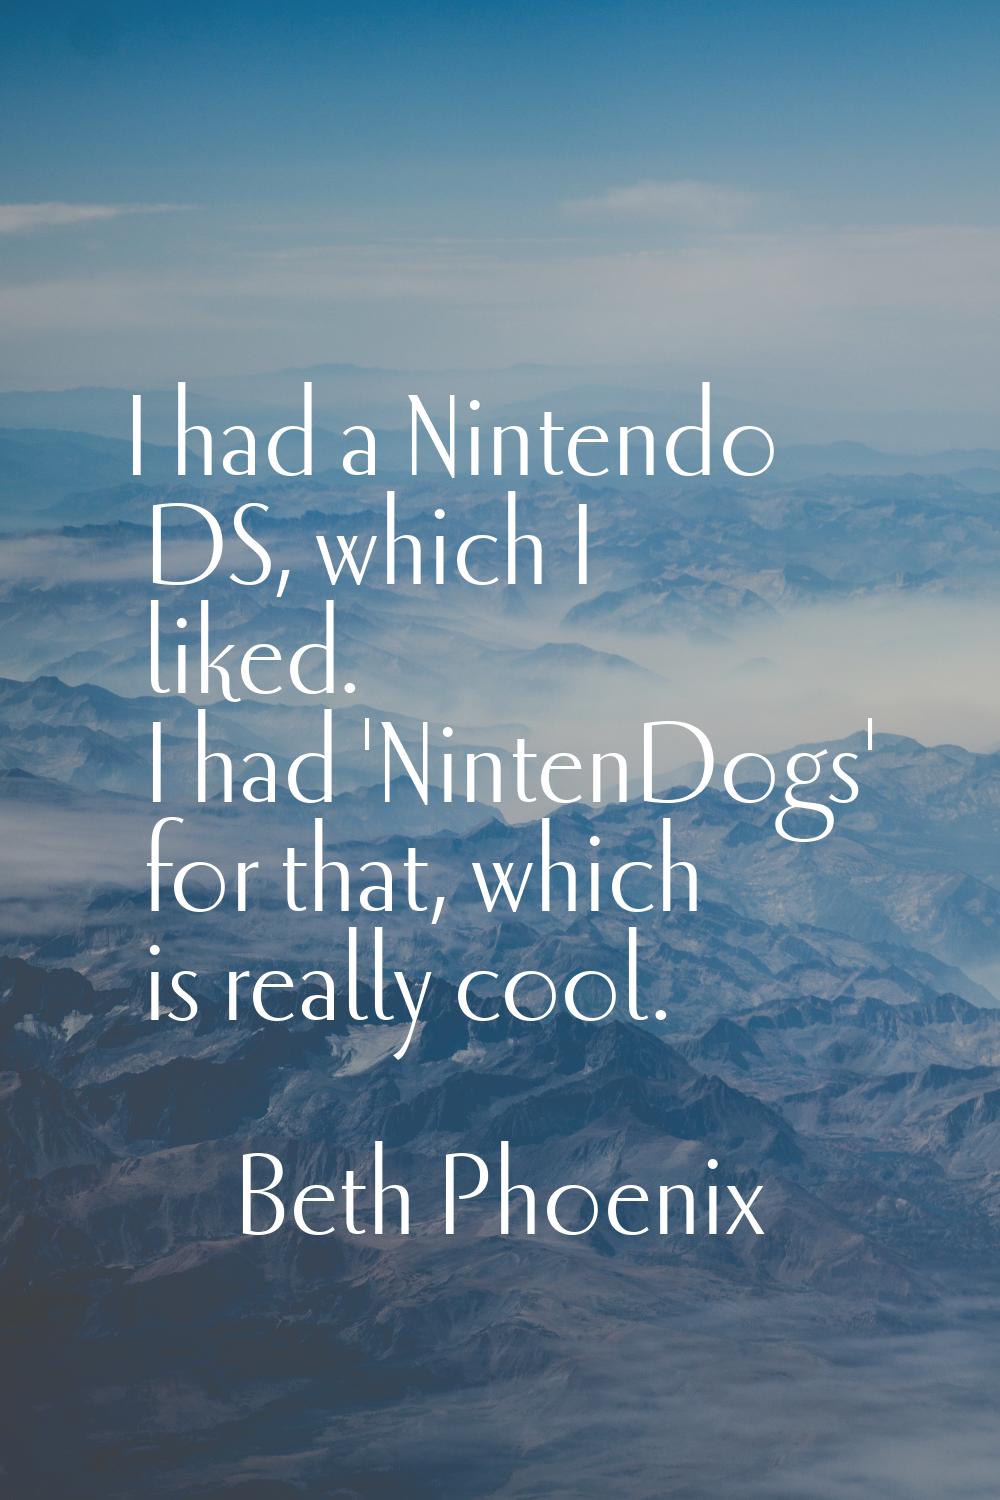 I had a Nintendo DS, which I liked. I had 'NintenDogs' for that, which is really cool.